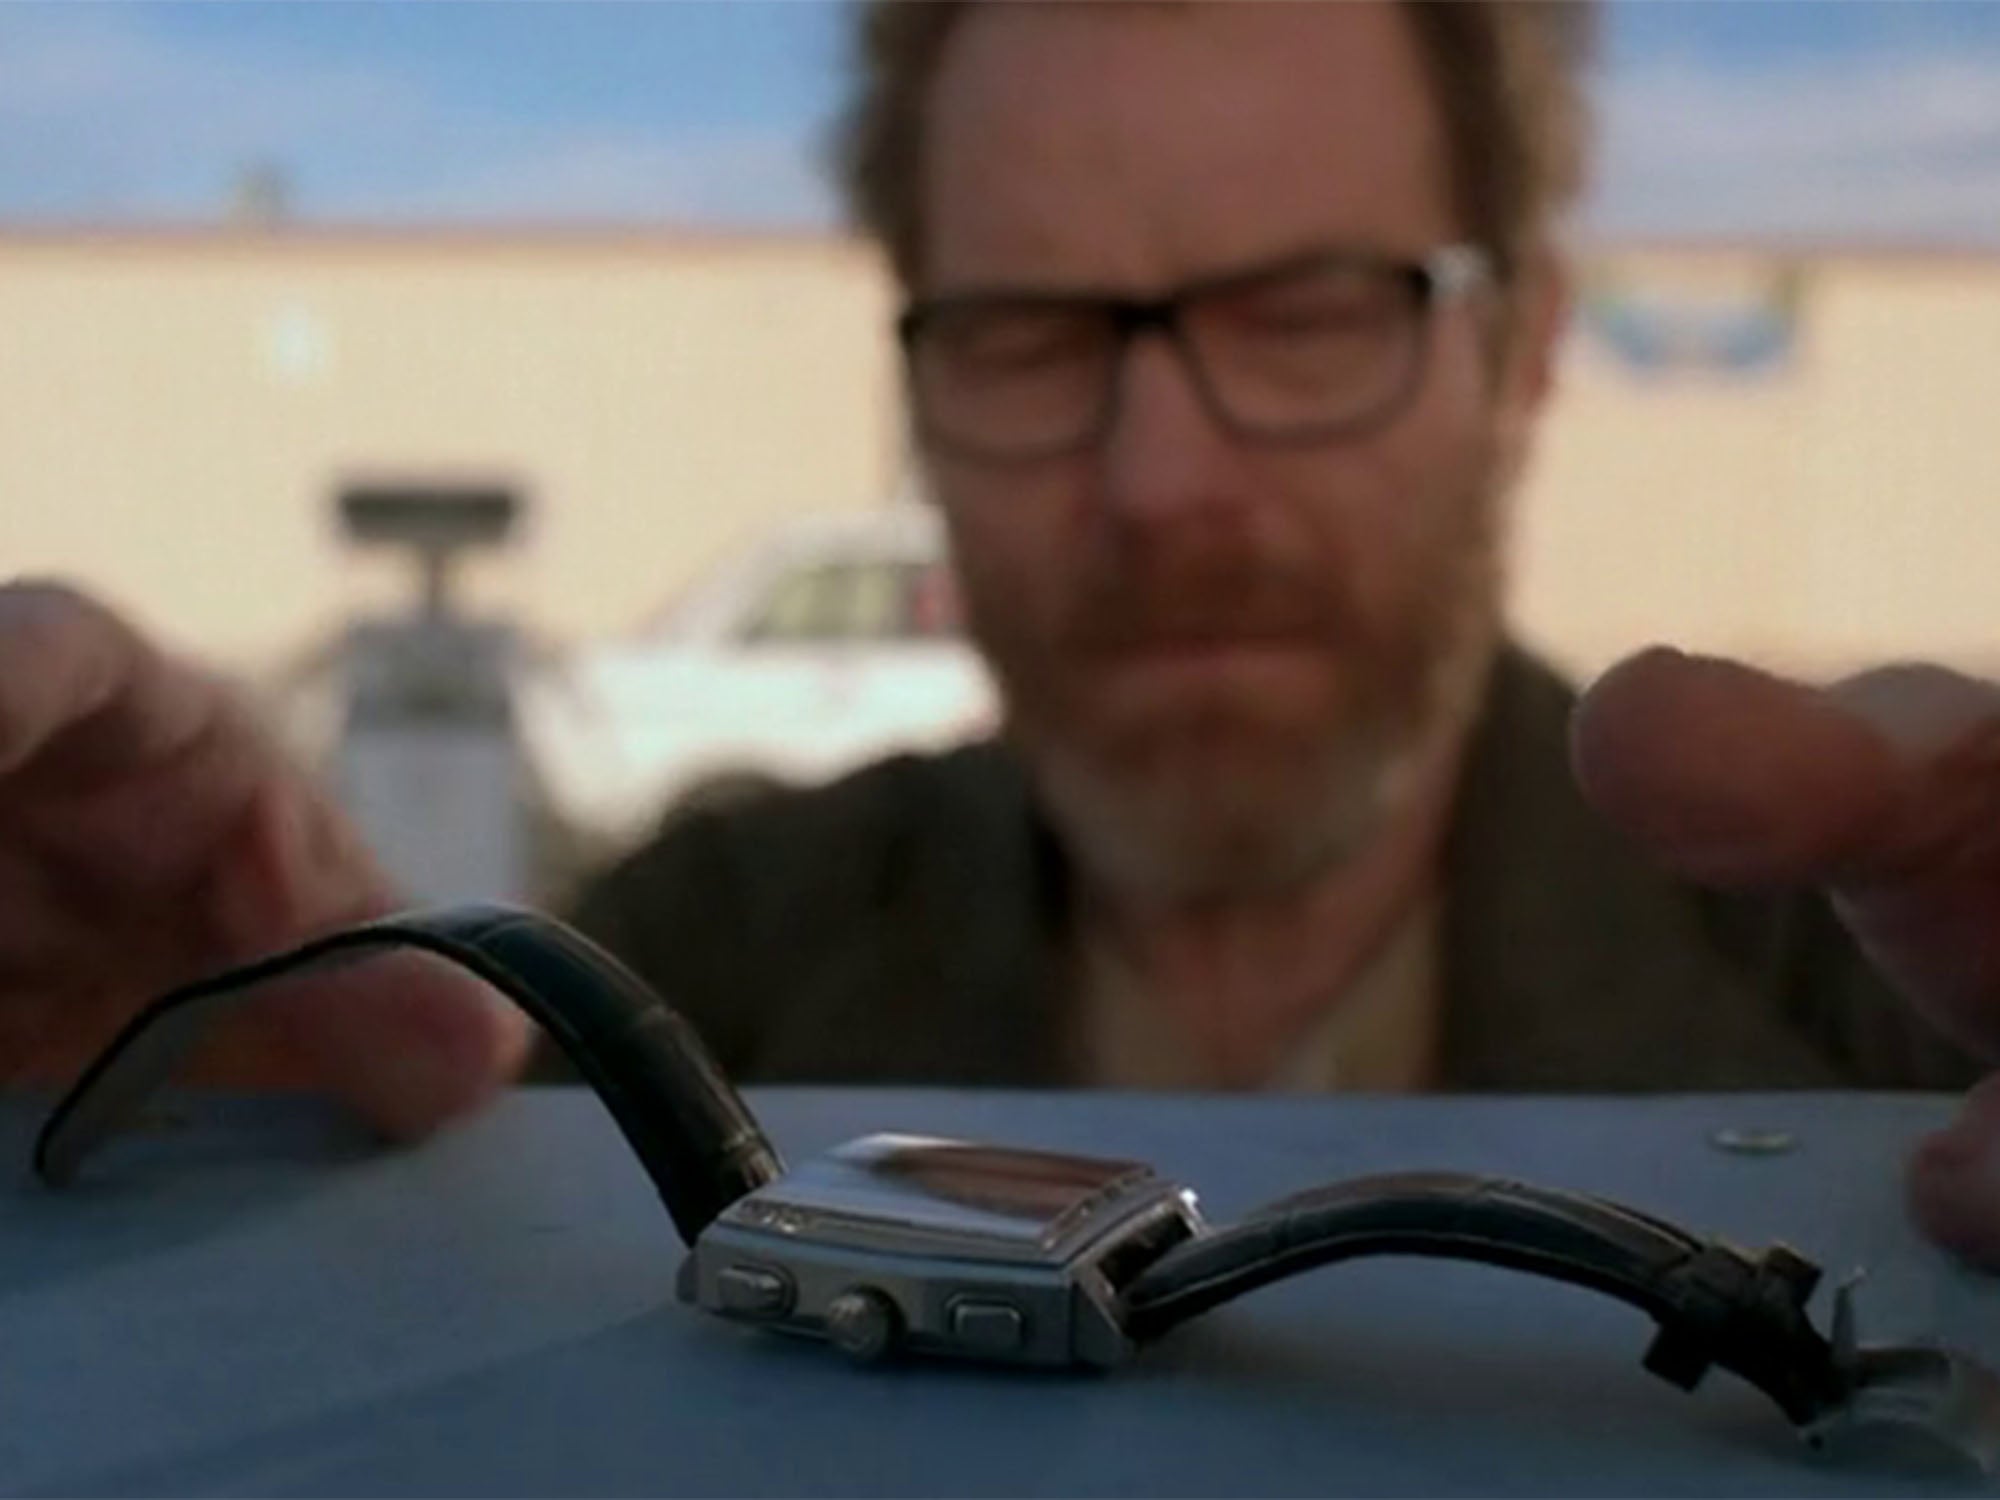 Walter White abandons TAG Heuer Monaco on phone booth